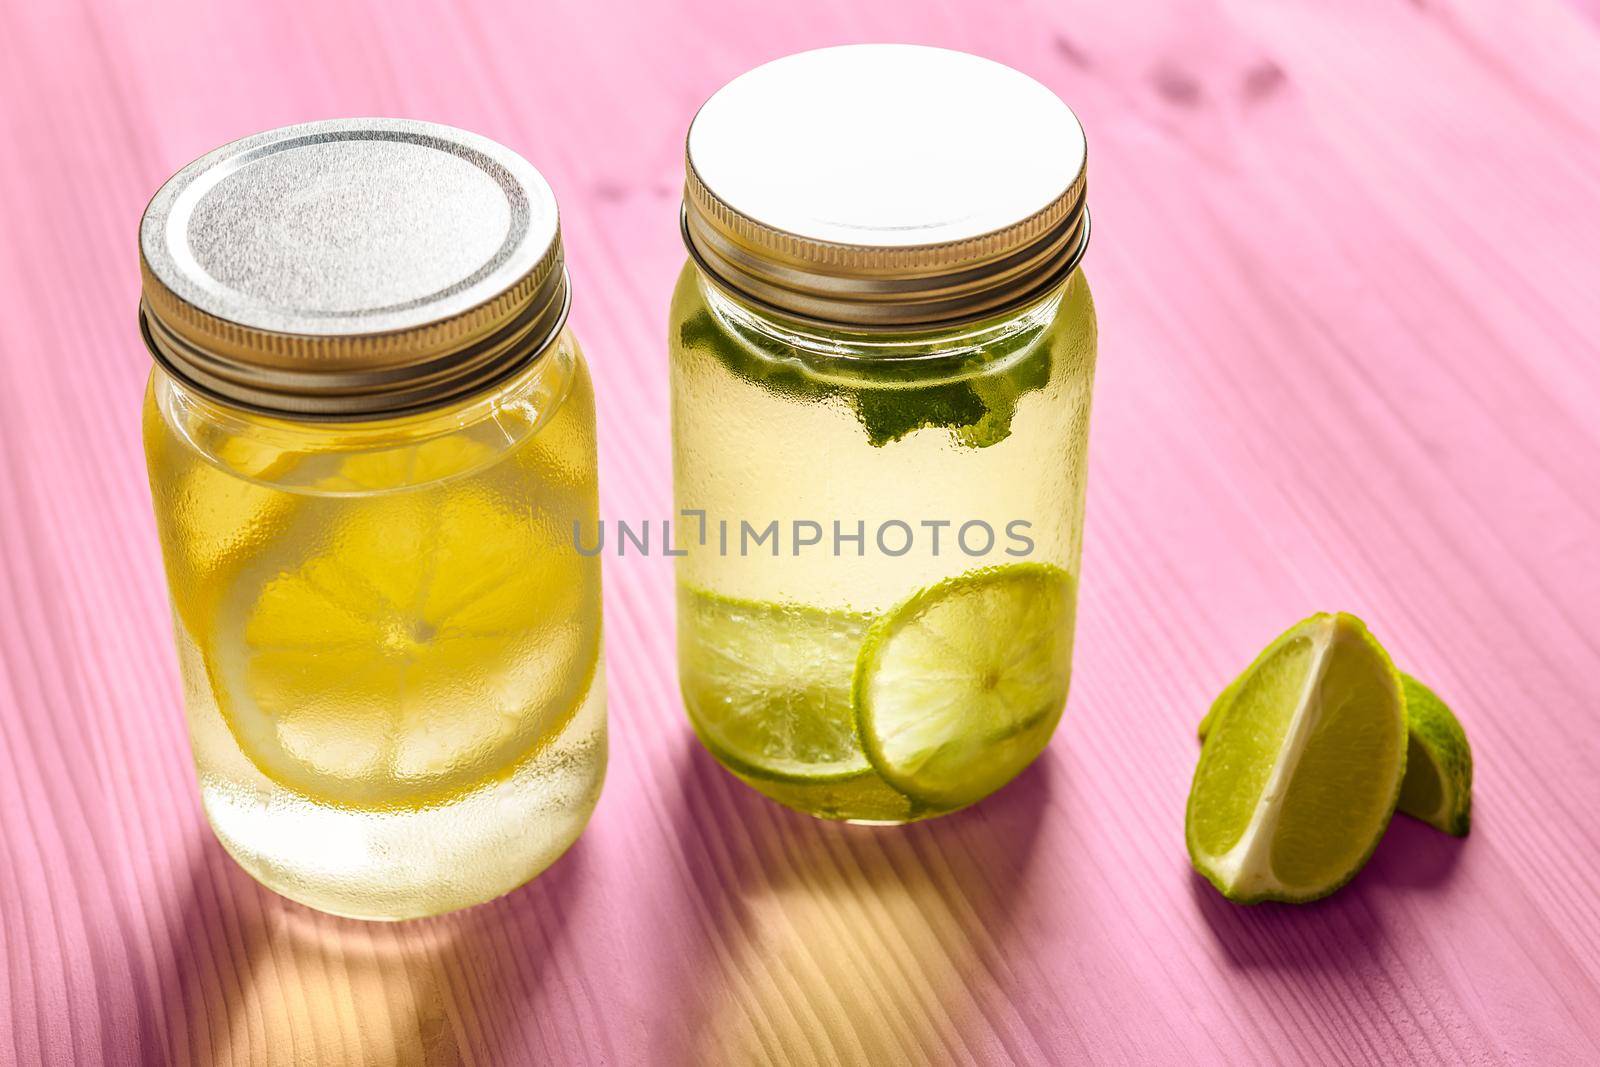 two glass jars with lids full of water with slices of lime and lemon, are on a pink wooden table and illuminated by sunlight, there are also two slices of lime on the table